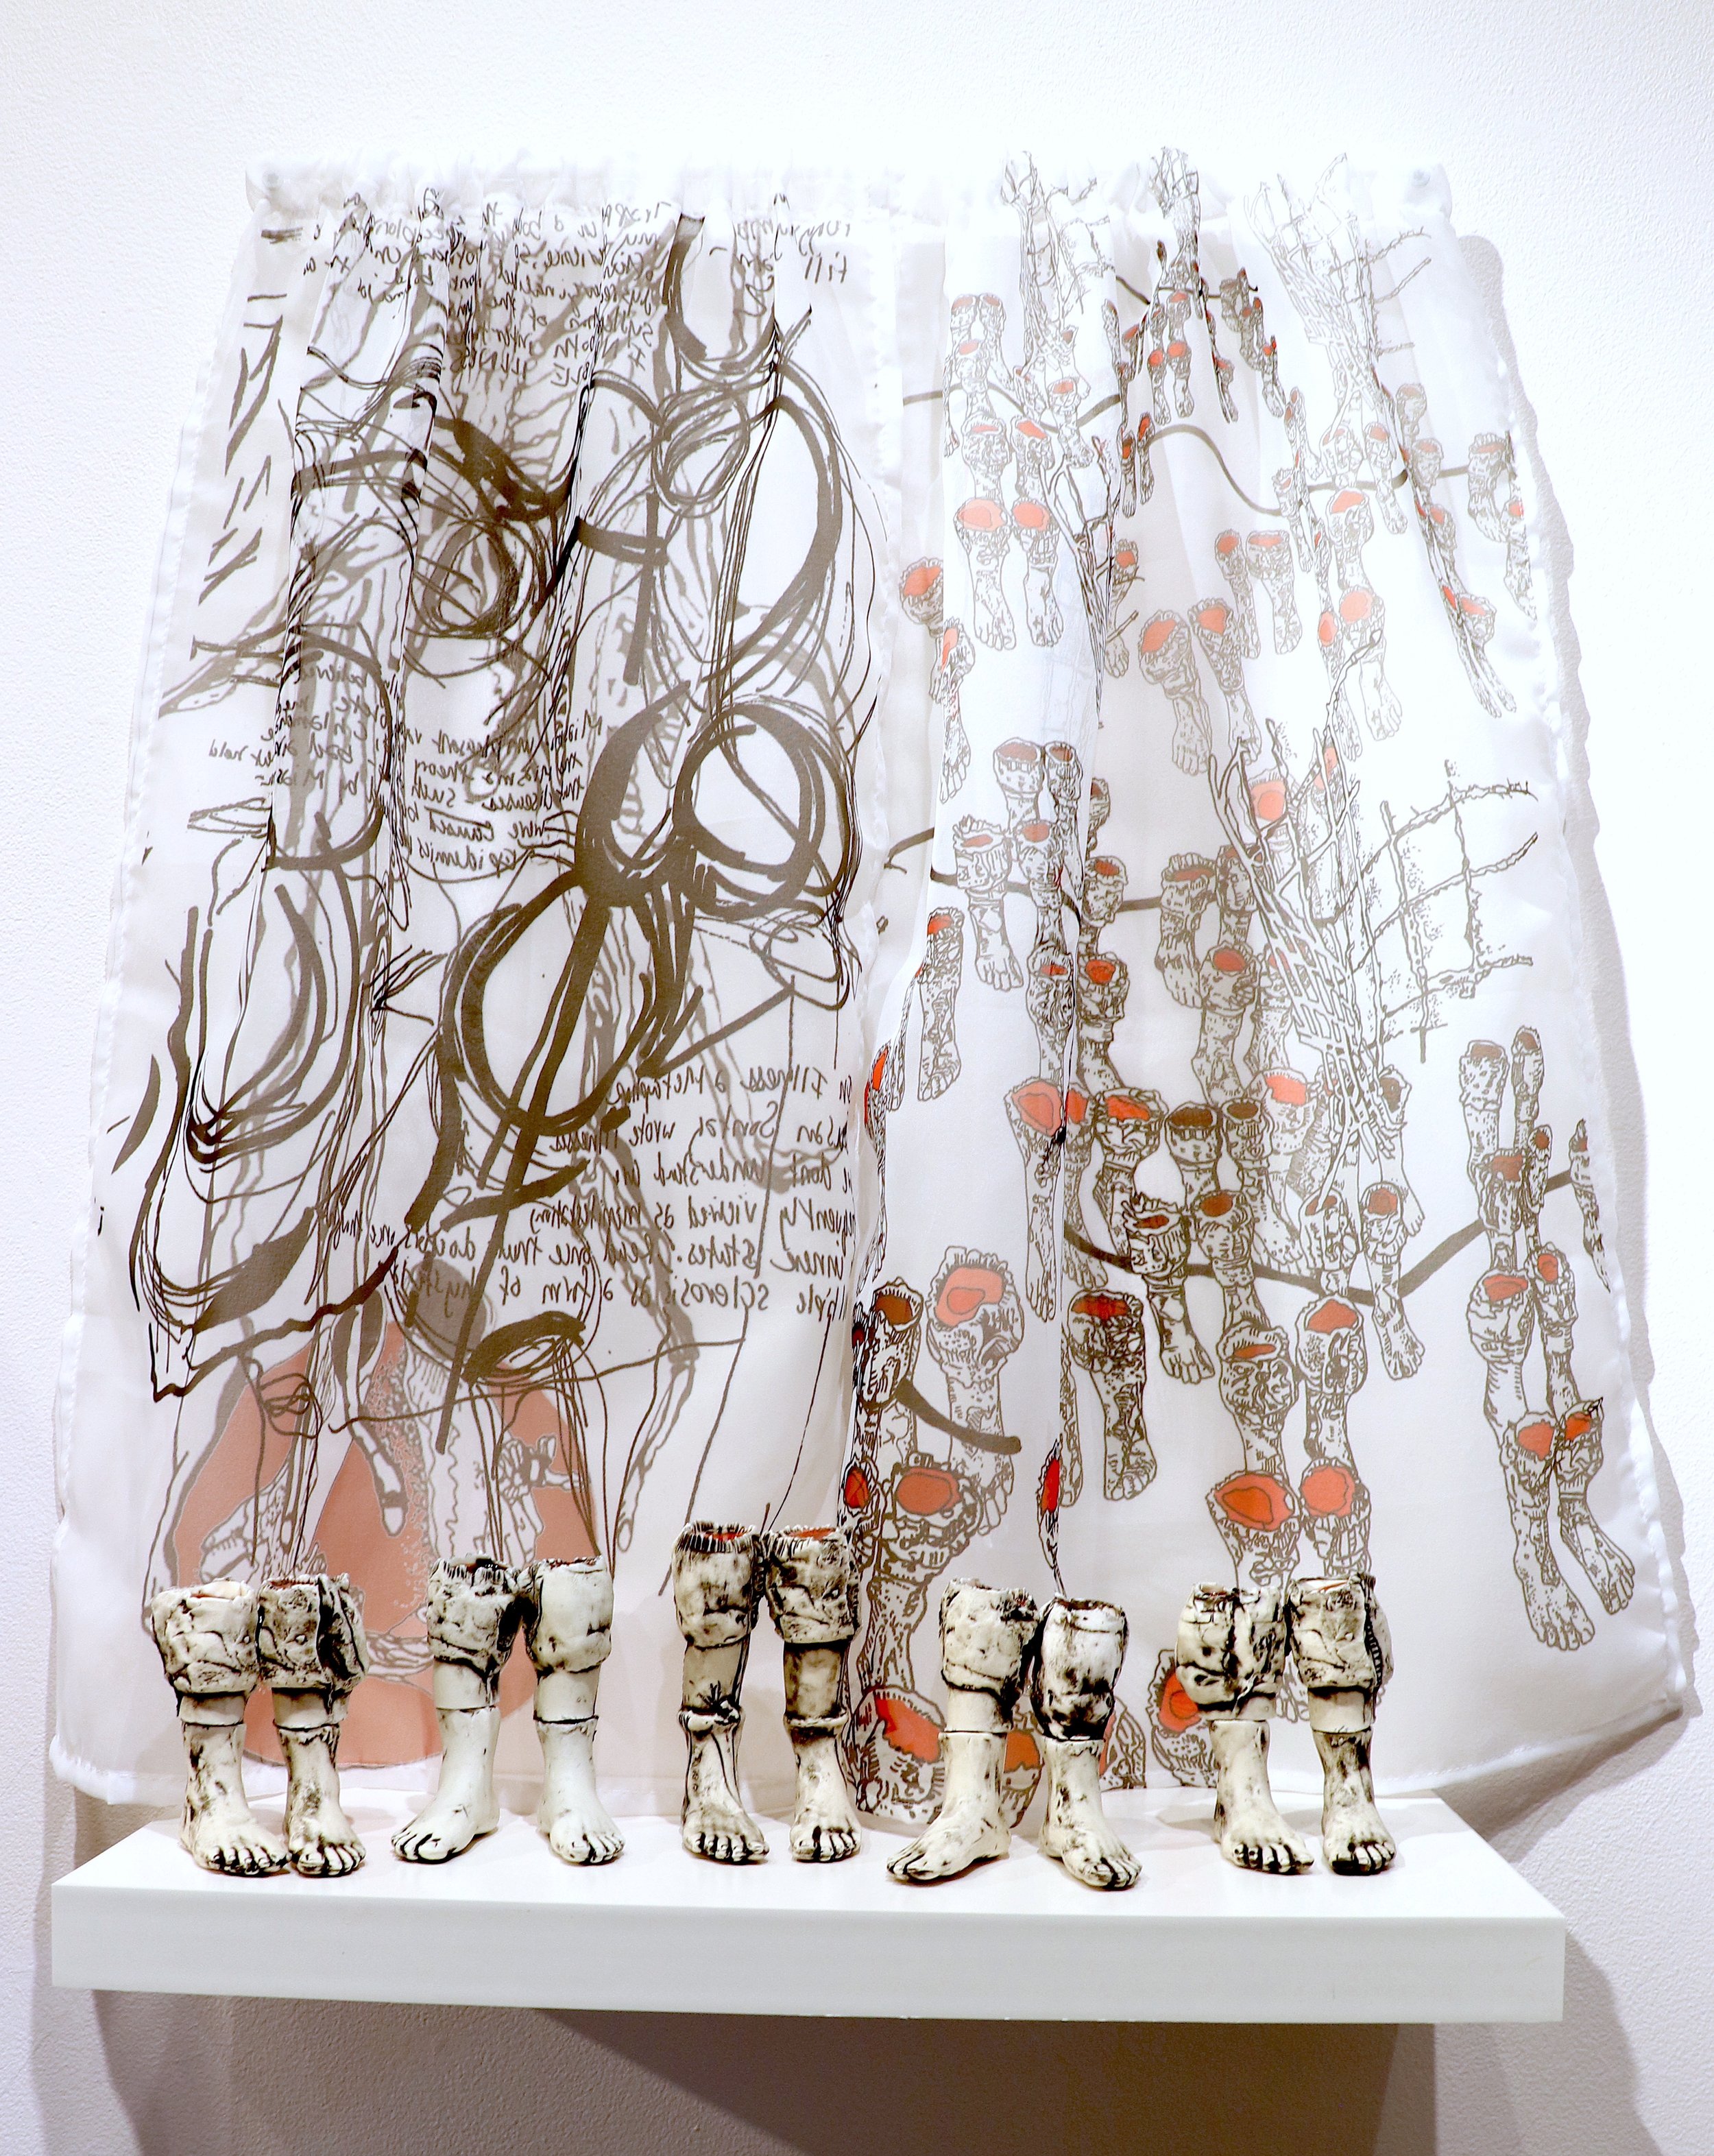 Candace Garlock_Citizens of that Other Space_Ceramic and Digital Print on Fabric_Installation 2 .jpg